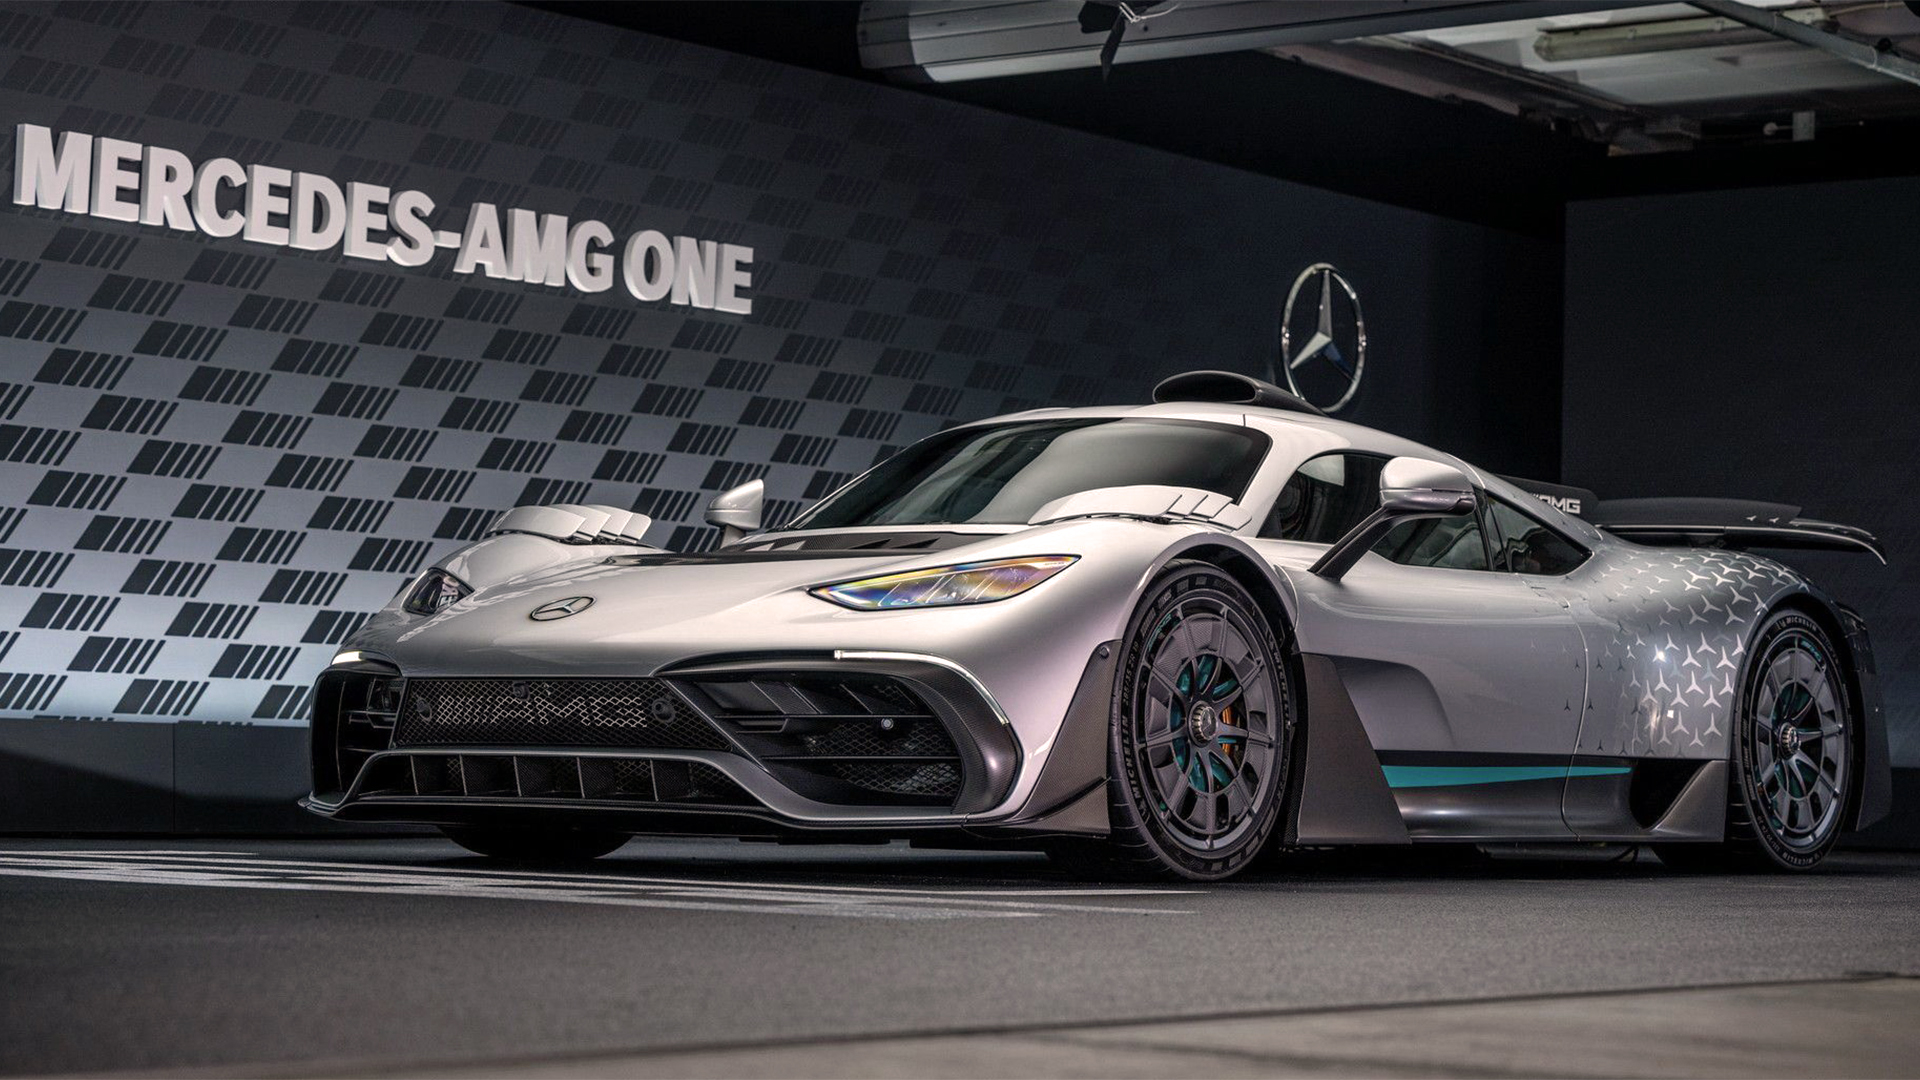 There will be only 275 units of Mercedes-AMG One.  These are handcrafted in England but delivered to their owners in Germany